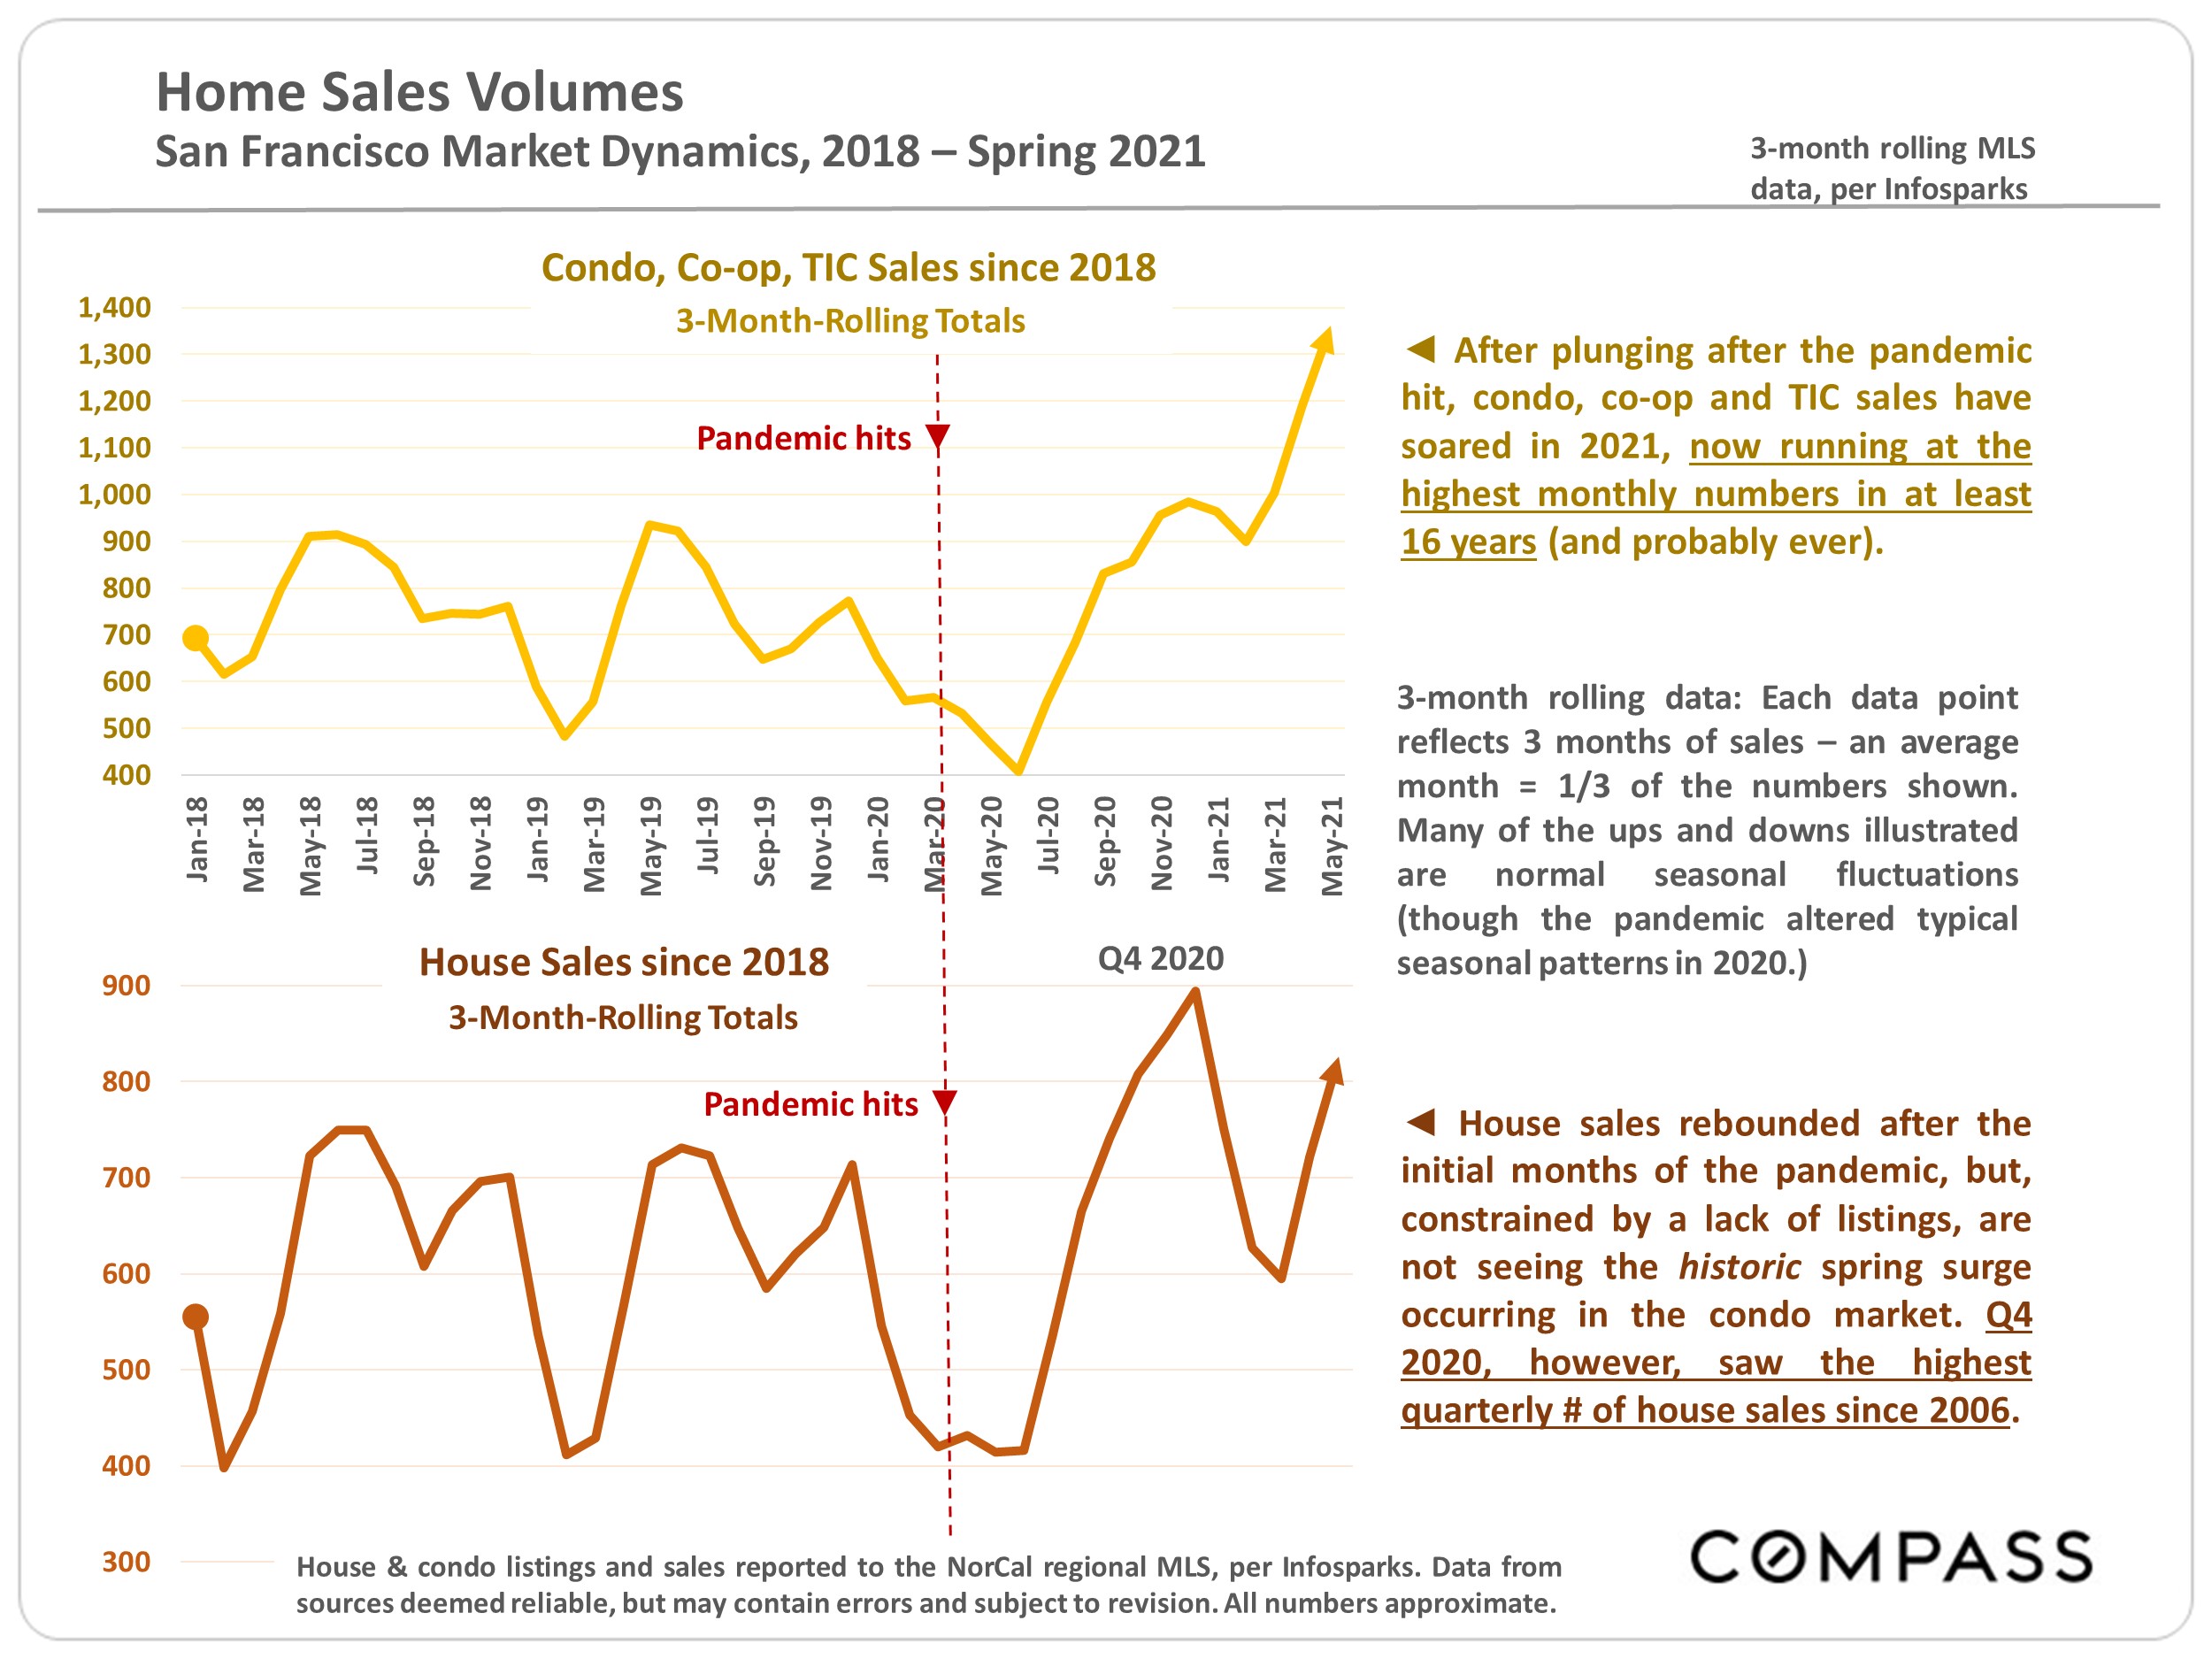 Chart showing home sales volumes, San Francisco Market Dynamics for 2018 to Spring 2021, for house, condo, co-op, TIC, 3-month rolling data